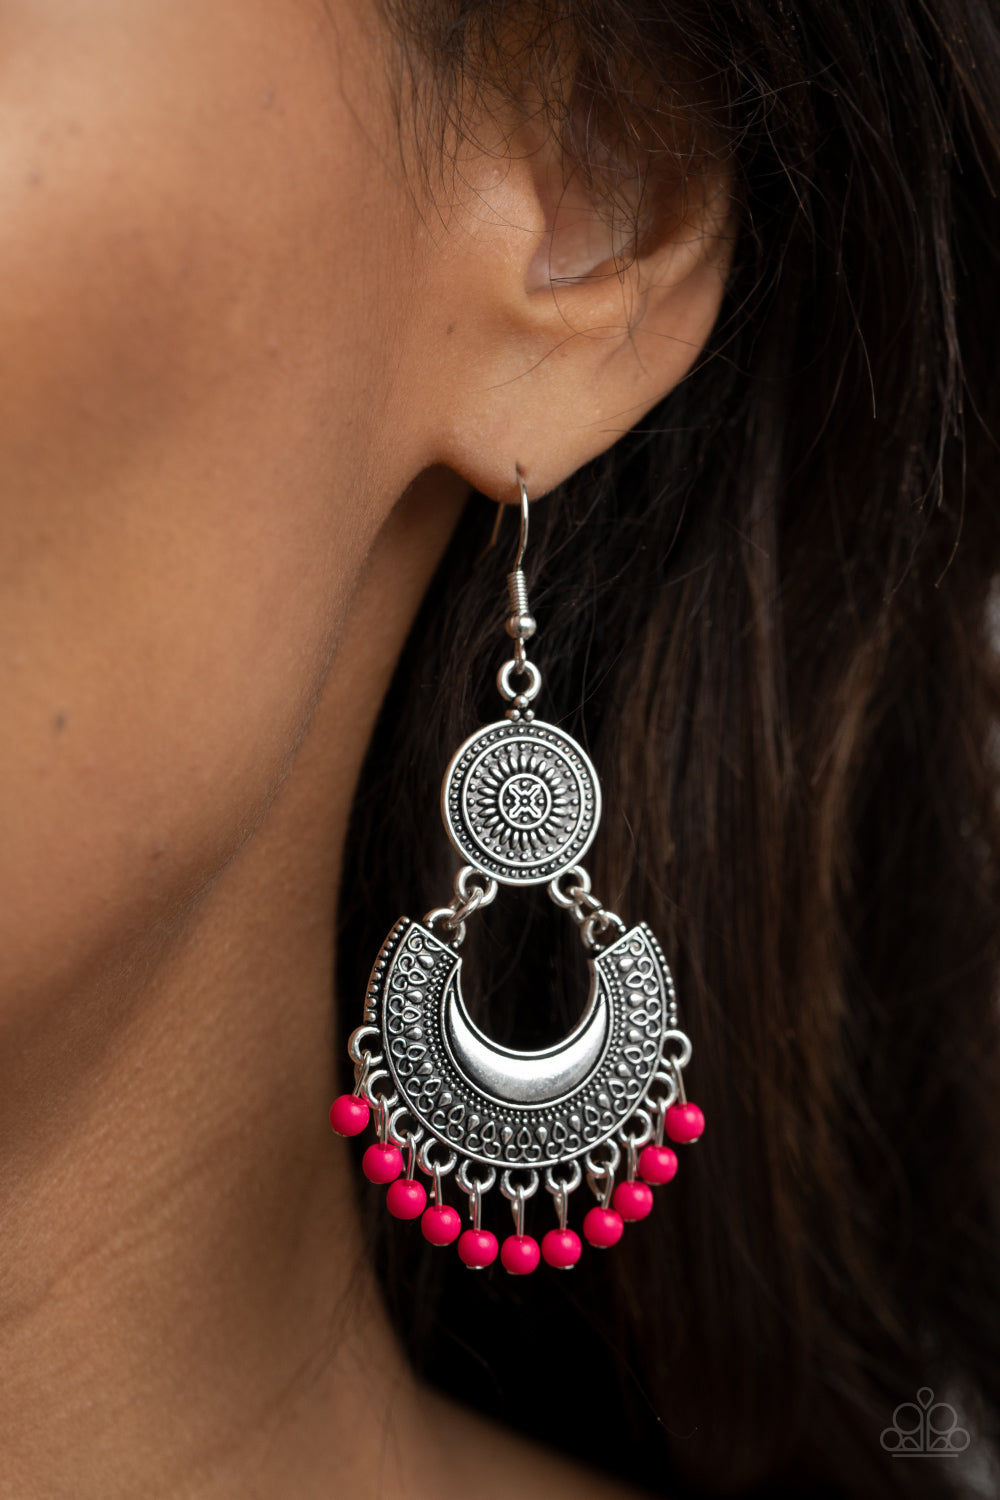 &lt;p&gt; Dainty pink beads dangle from the bottom of a decorative silver crescent plate that links to the bottom of an ornately embossed silver disc, creating a colorful fringe. Earring attaches to a standard fishhook fitting.
&lt;/p&gt;  

&lt;p&gt; &lt;i&gt;  Sold as one pair of earrings. &lt;/i&gt;  &lt;/p&gt;

&lt;br&gt;